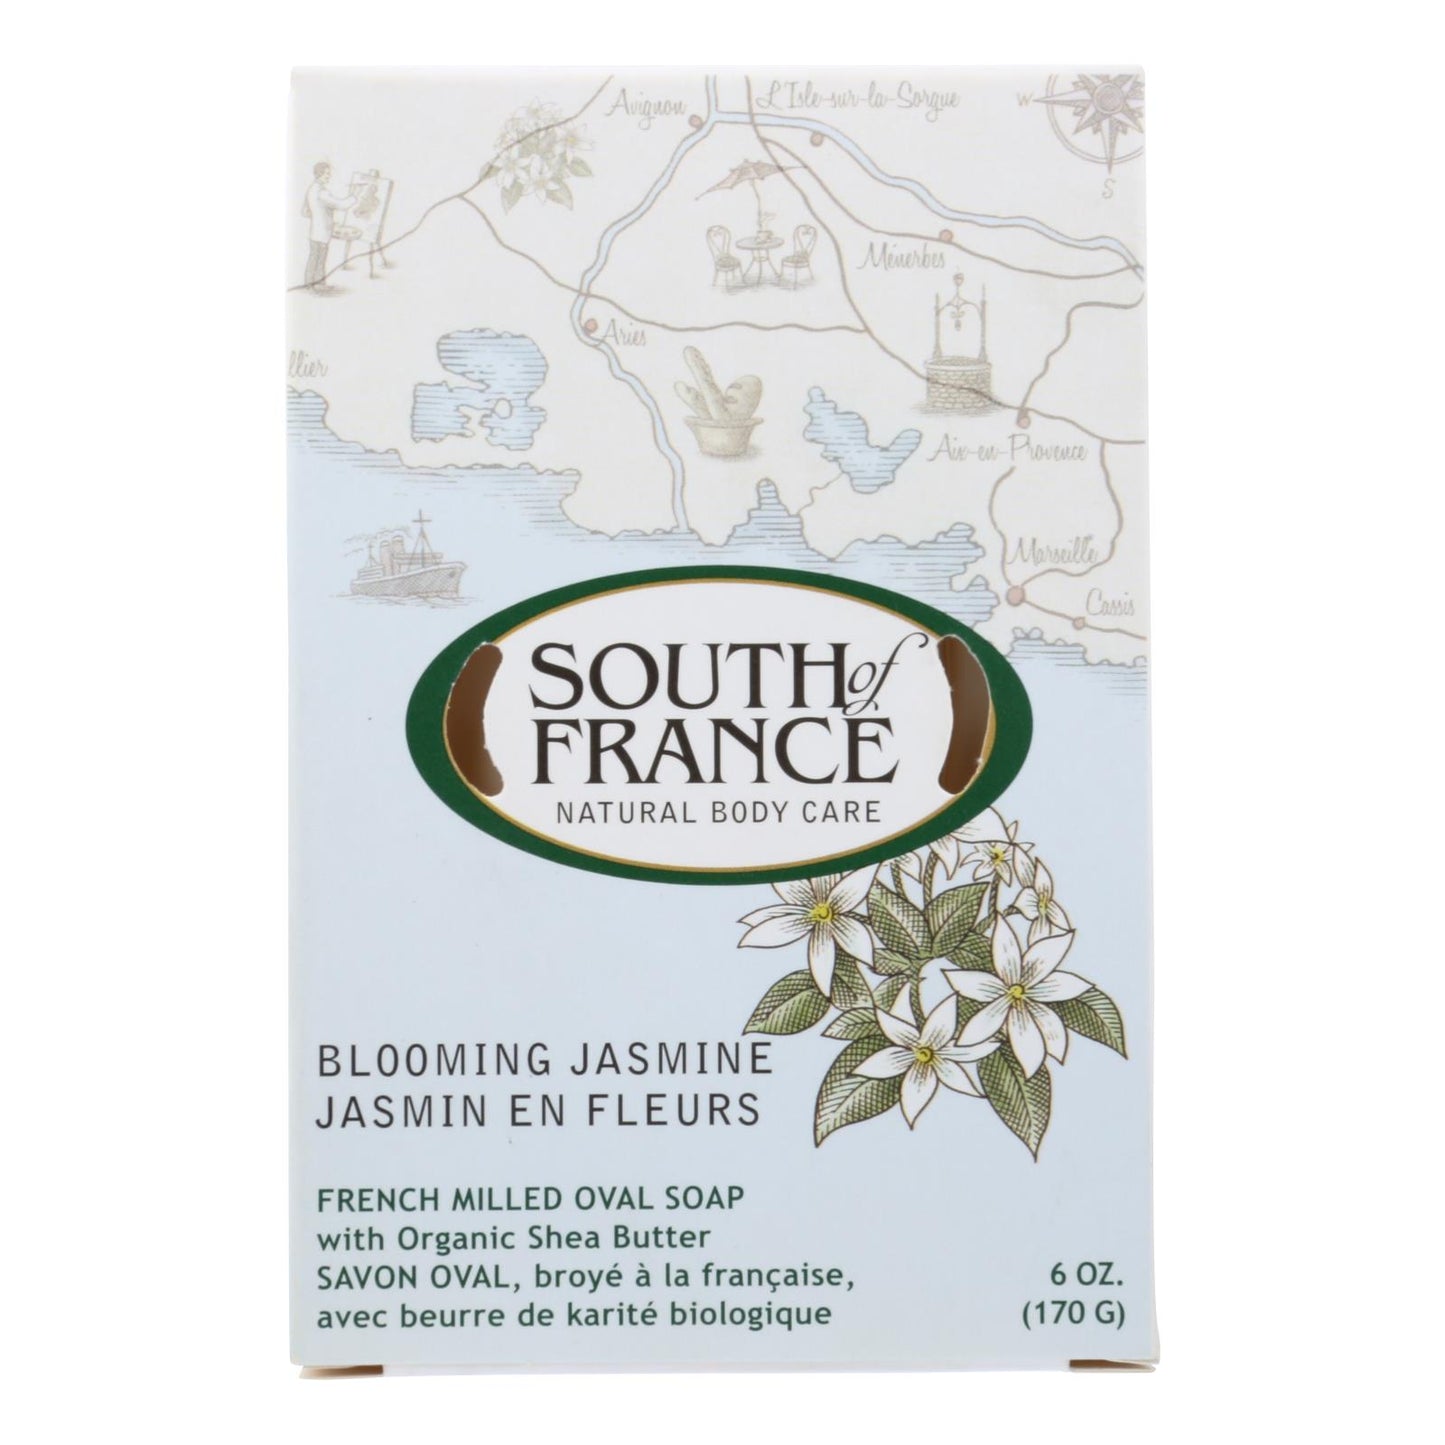 South Of France Bar Soap - Blooming Jasmine - 6 Oz - 1 Each